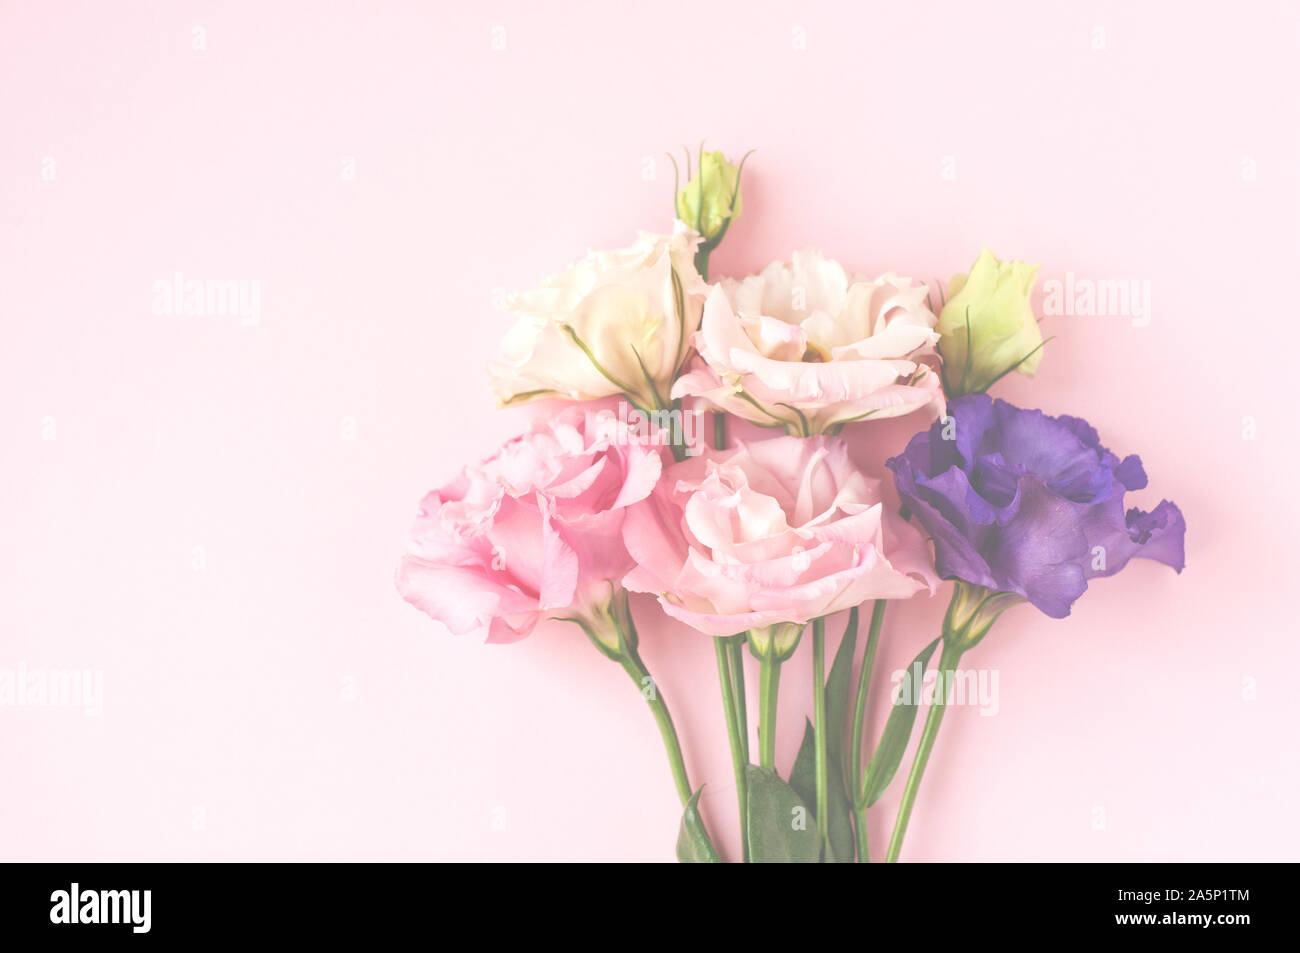 Beautiful pink, purple and white eustoma flower (lisianthus) in full bloom with green leaves. Bouquet of flowers on pink background. Stock Photo